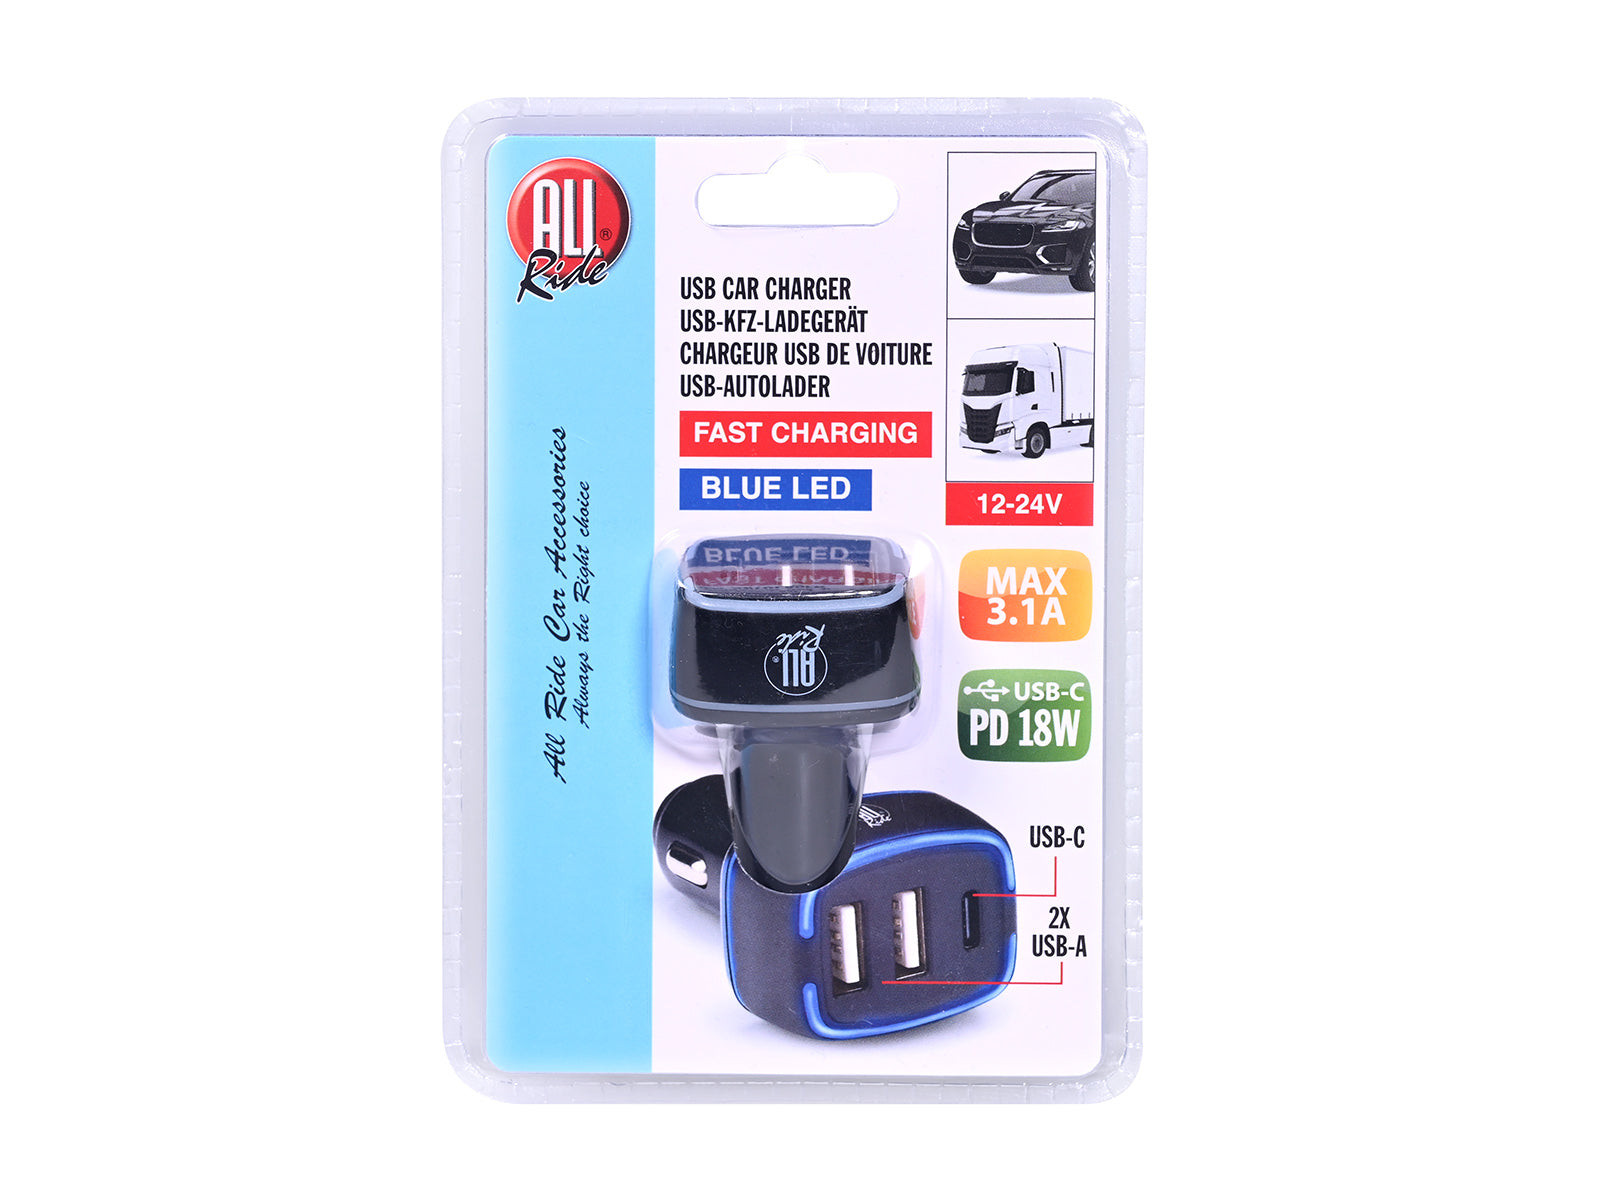 ALL Ride Usb Auto Lader